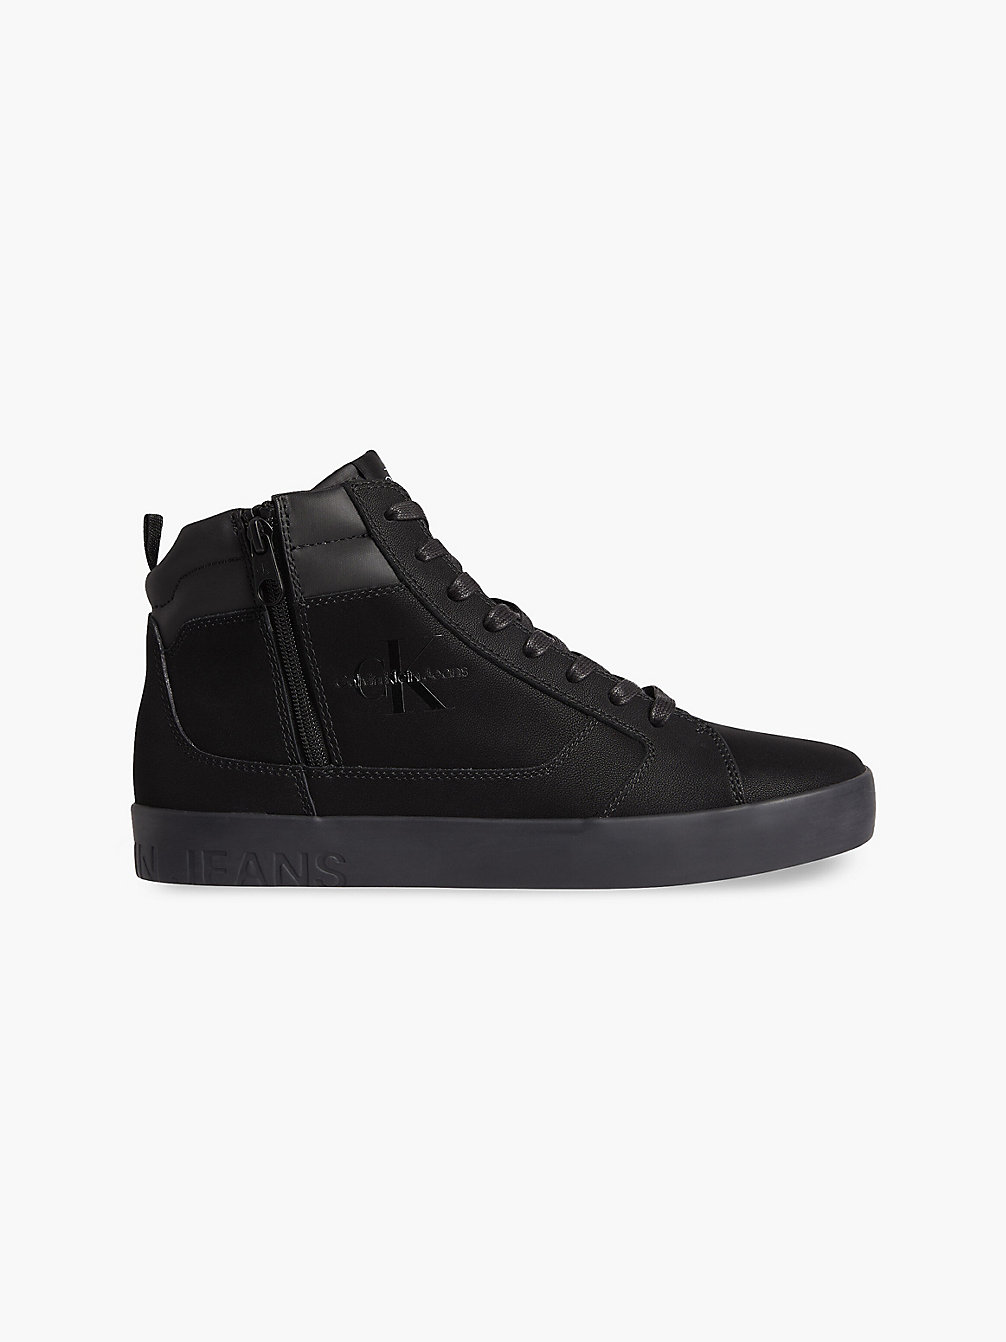 TRIPLE BLACK Leather High-Top Trainers undefined men Calvin Klein